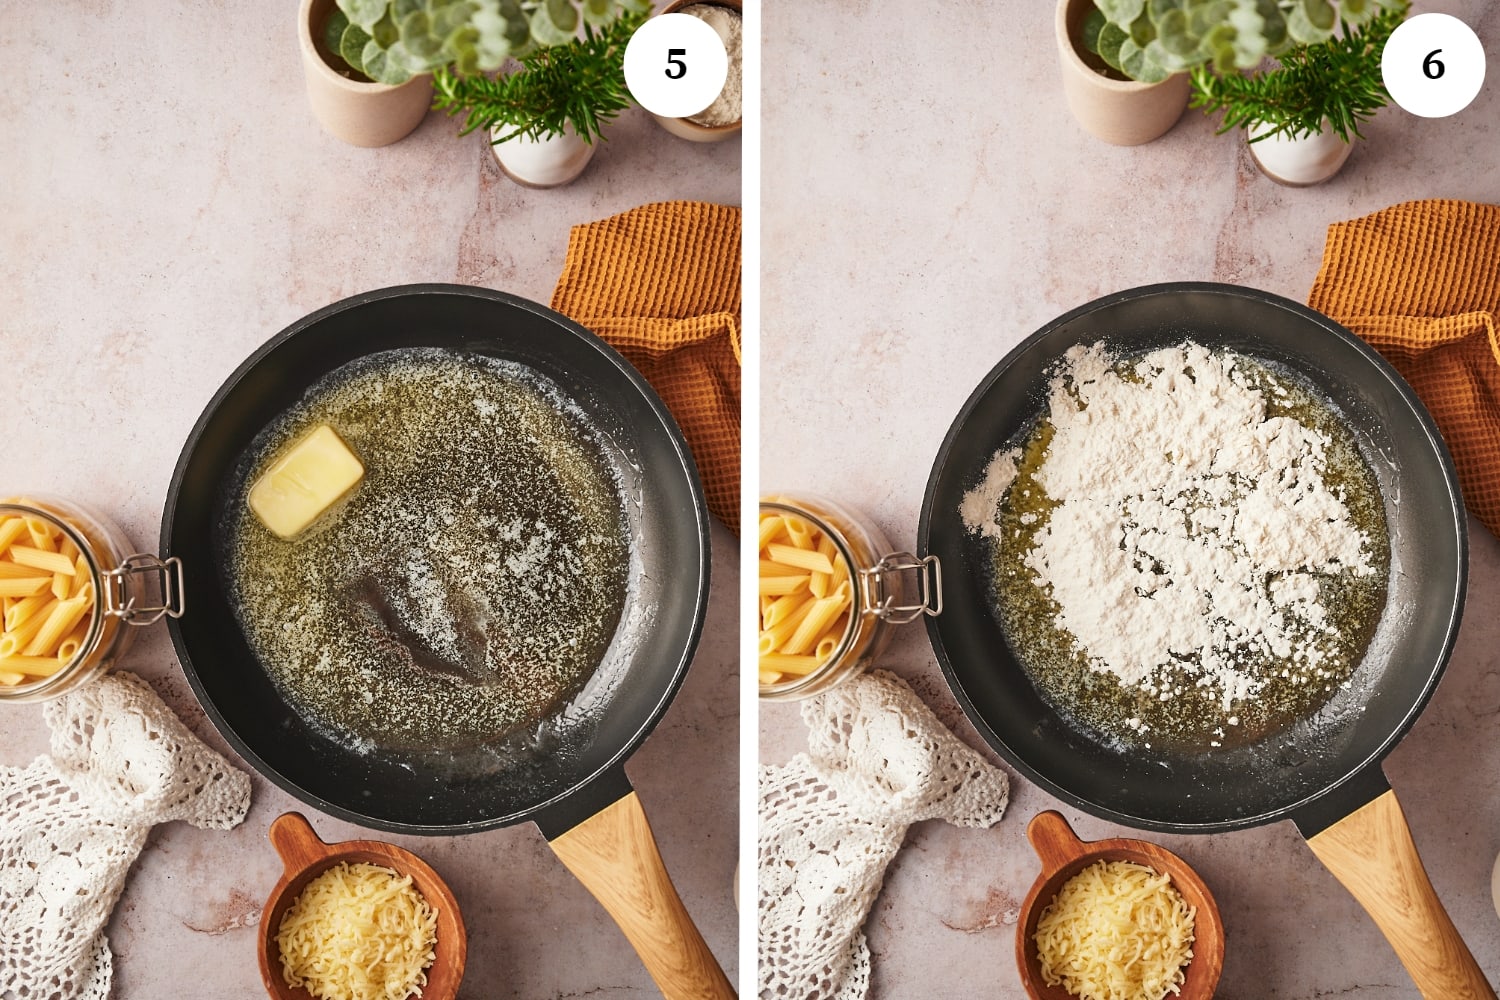 baked penne procedure: first photo is a nonstick pan with butter. next photo is flour added onto the butter in a pan.